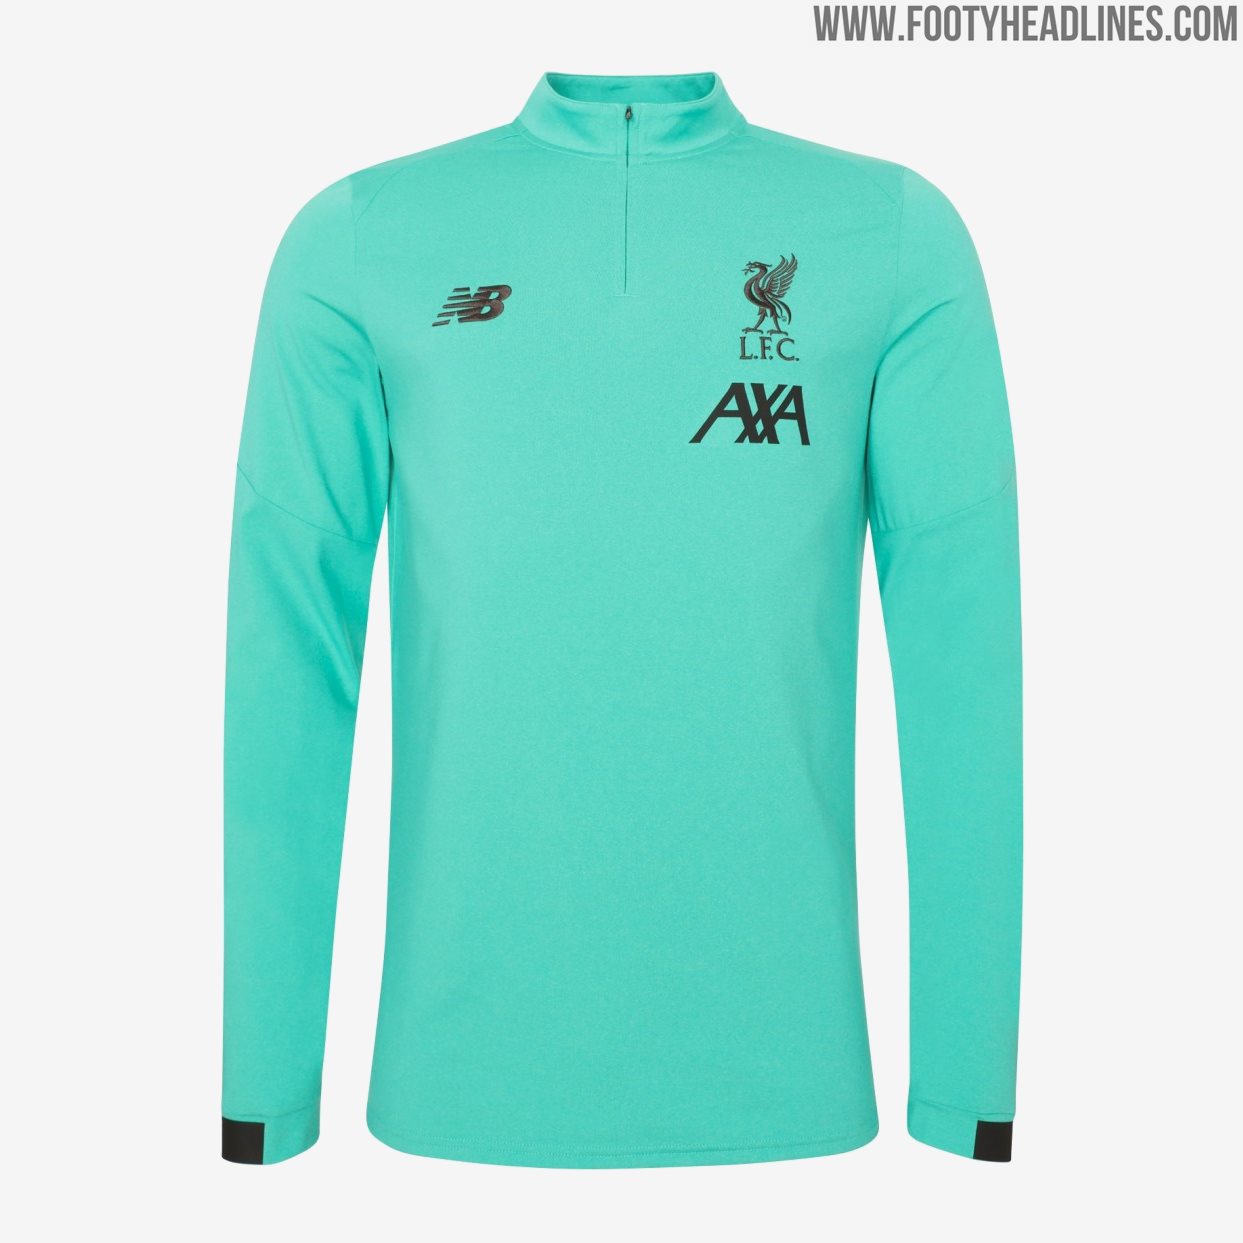 Last-Ever LFC Products By New Balance?! 2 Liverpool 2020 Training Kits ...